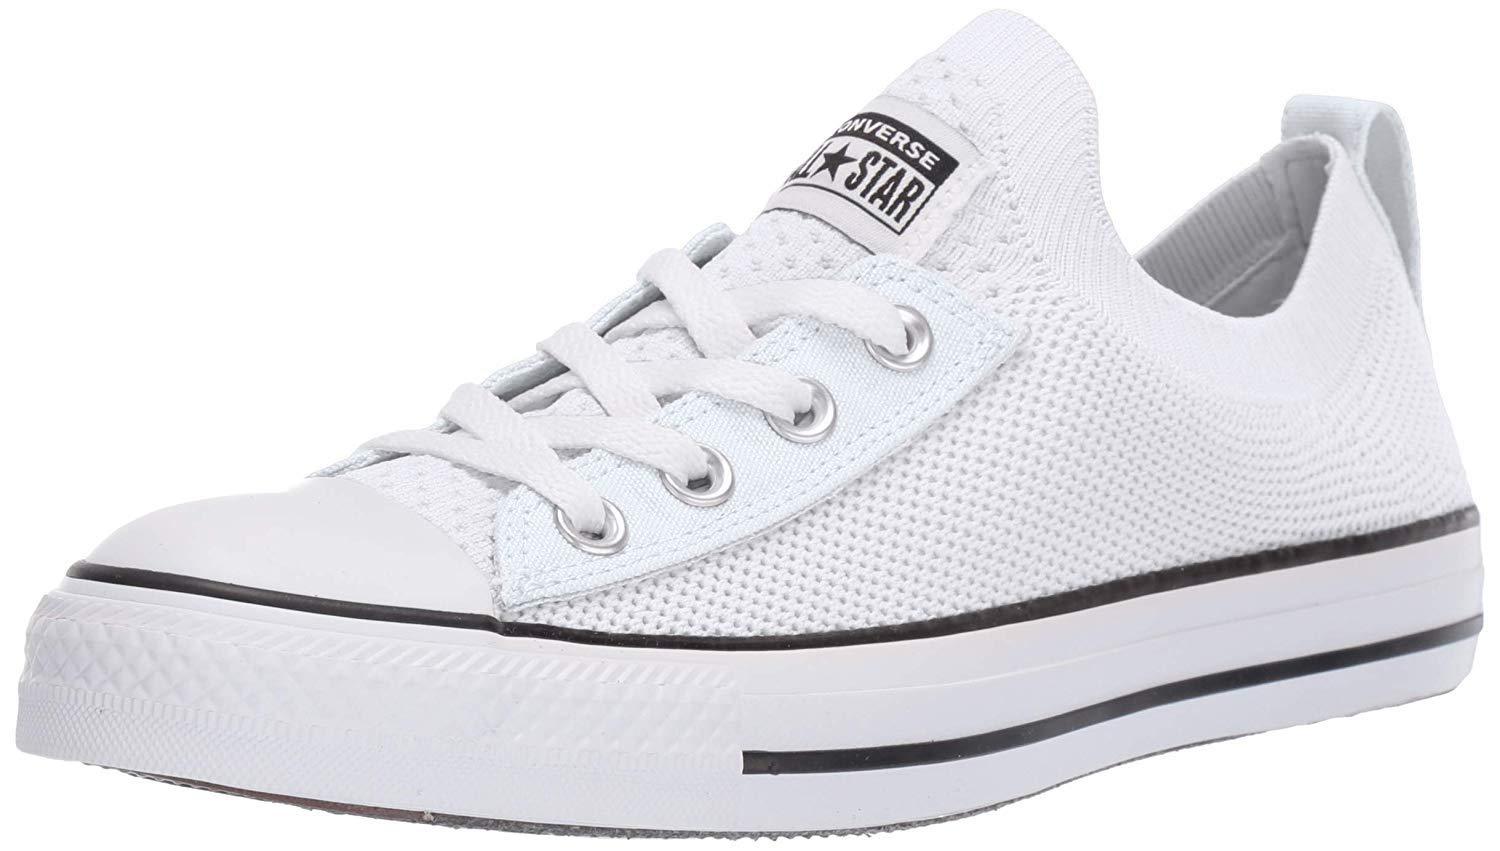 Converse Rubber Chuck Taylor Shoreline Knit Slip On Sneakers in  White/Black/White (White) - Save 67% | Lyst